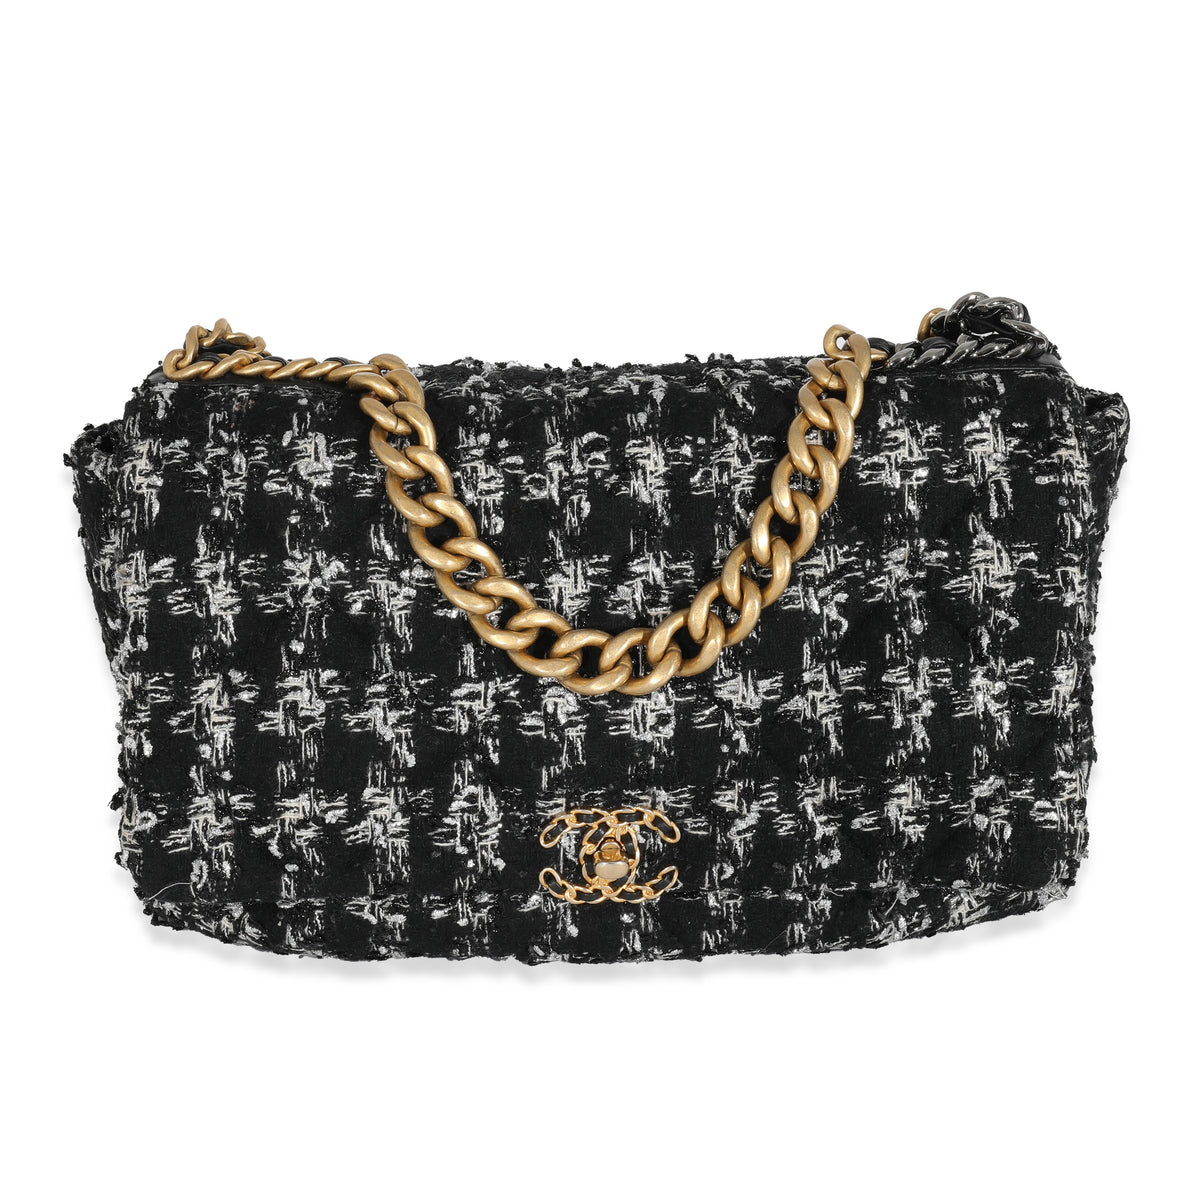 FOR SALE: SELLING MY HIGHLY SOUGHT AFTER CHANEL 19K HOUNDSTOOTH